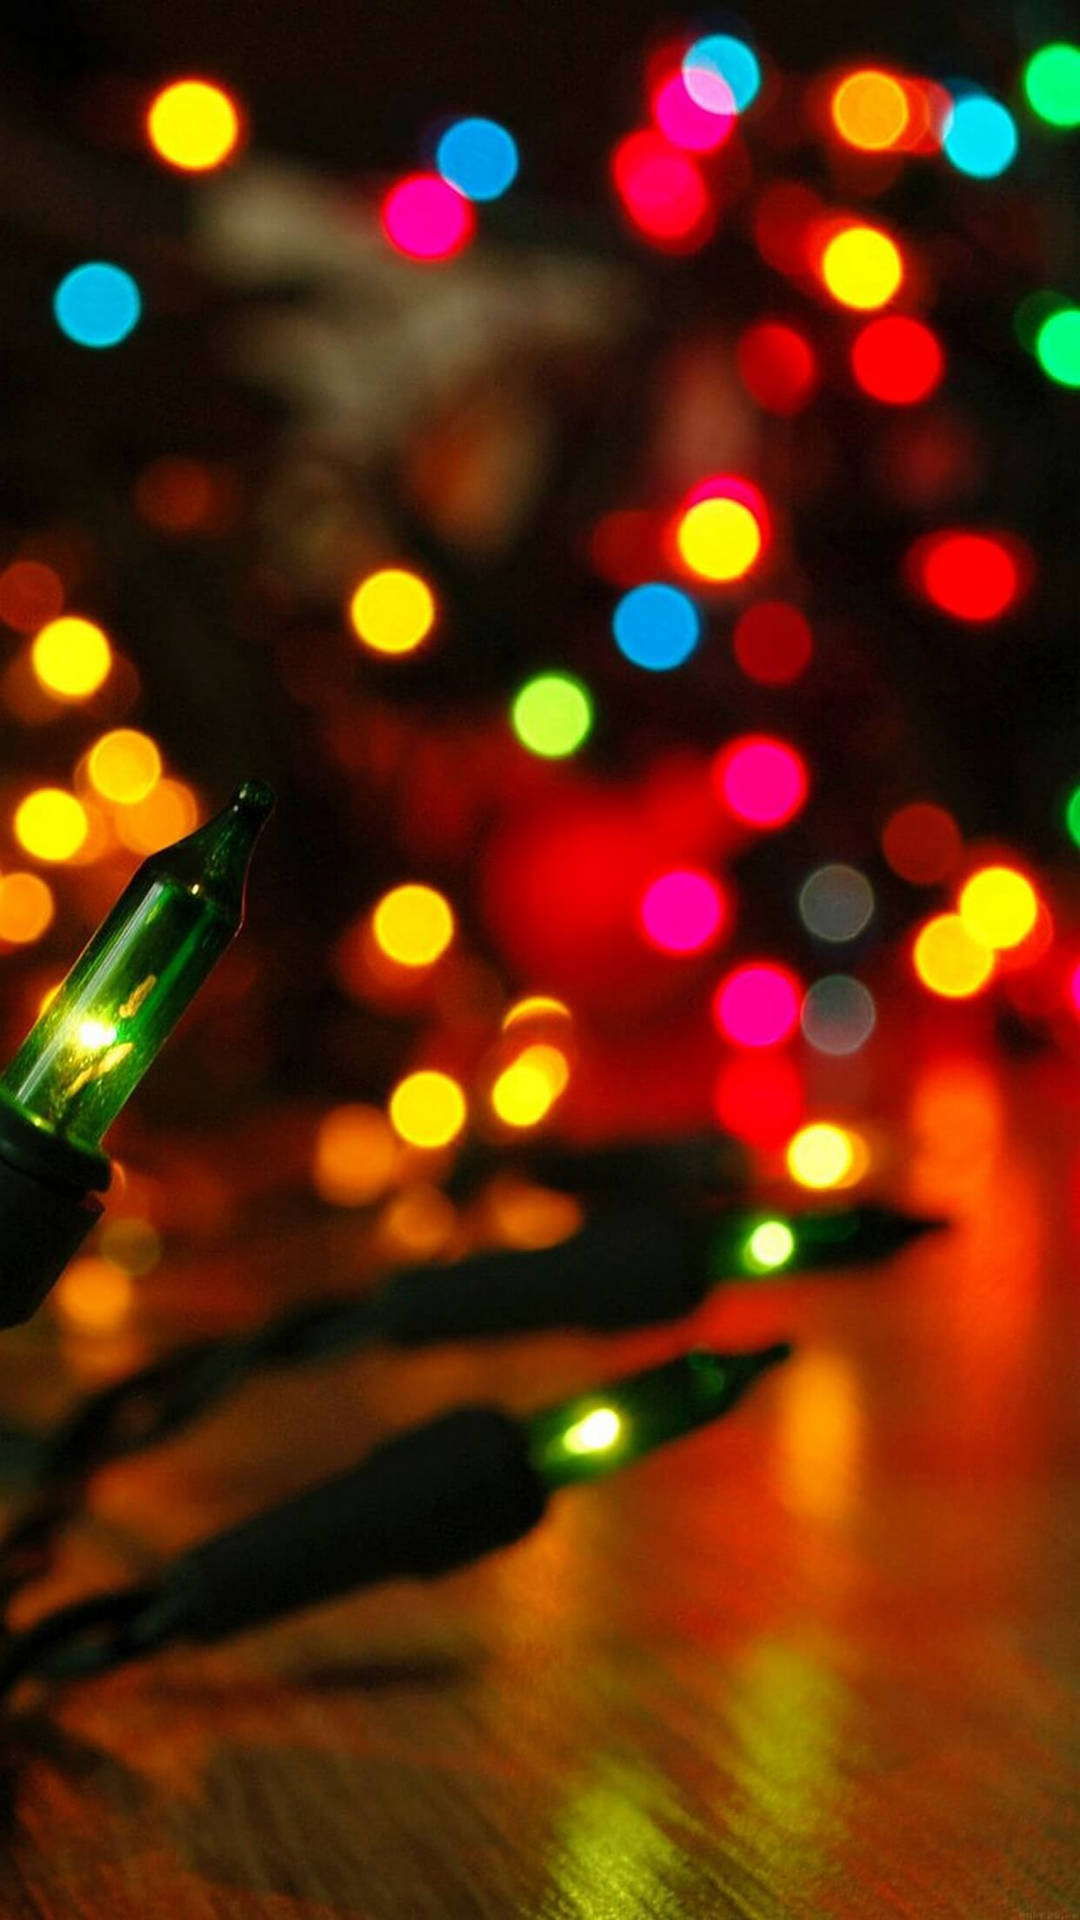 Enjoy the Magical Christmas Lights on Your Iphone! Wallpaper